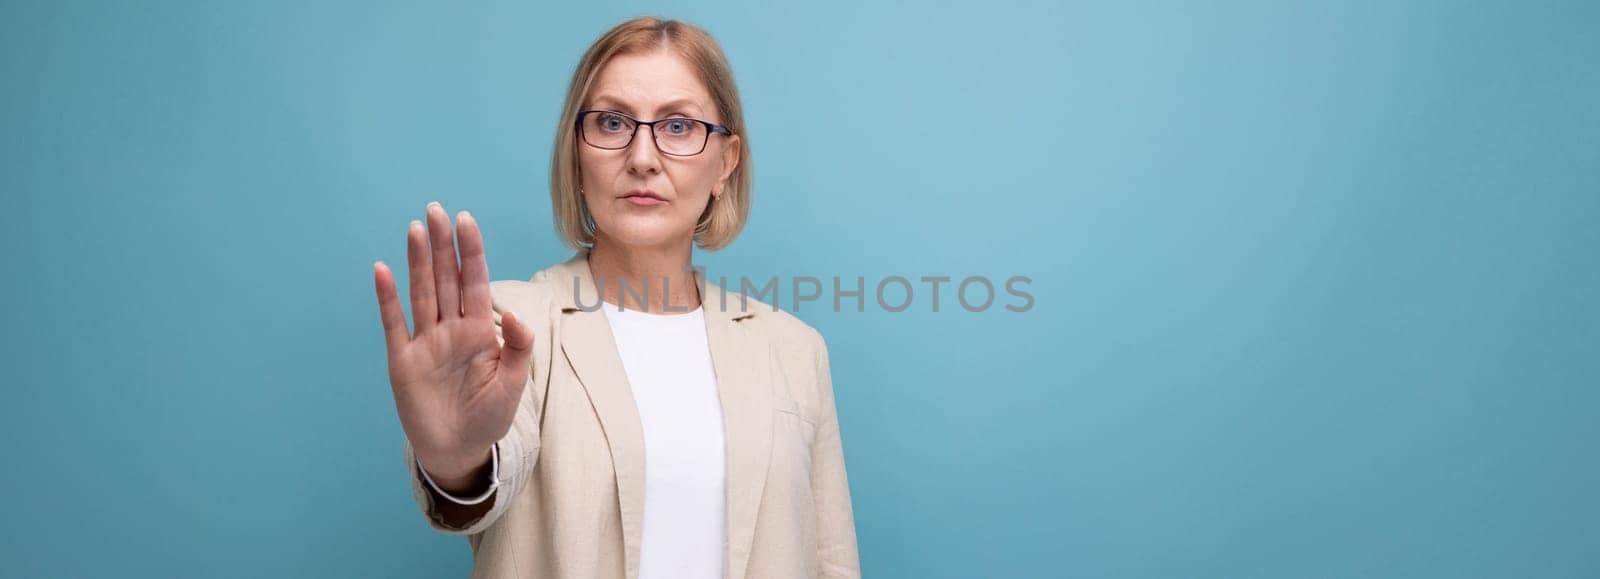 middle-aged woman business serious on bright studio background with copy space.